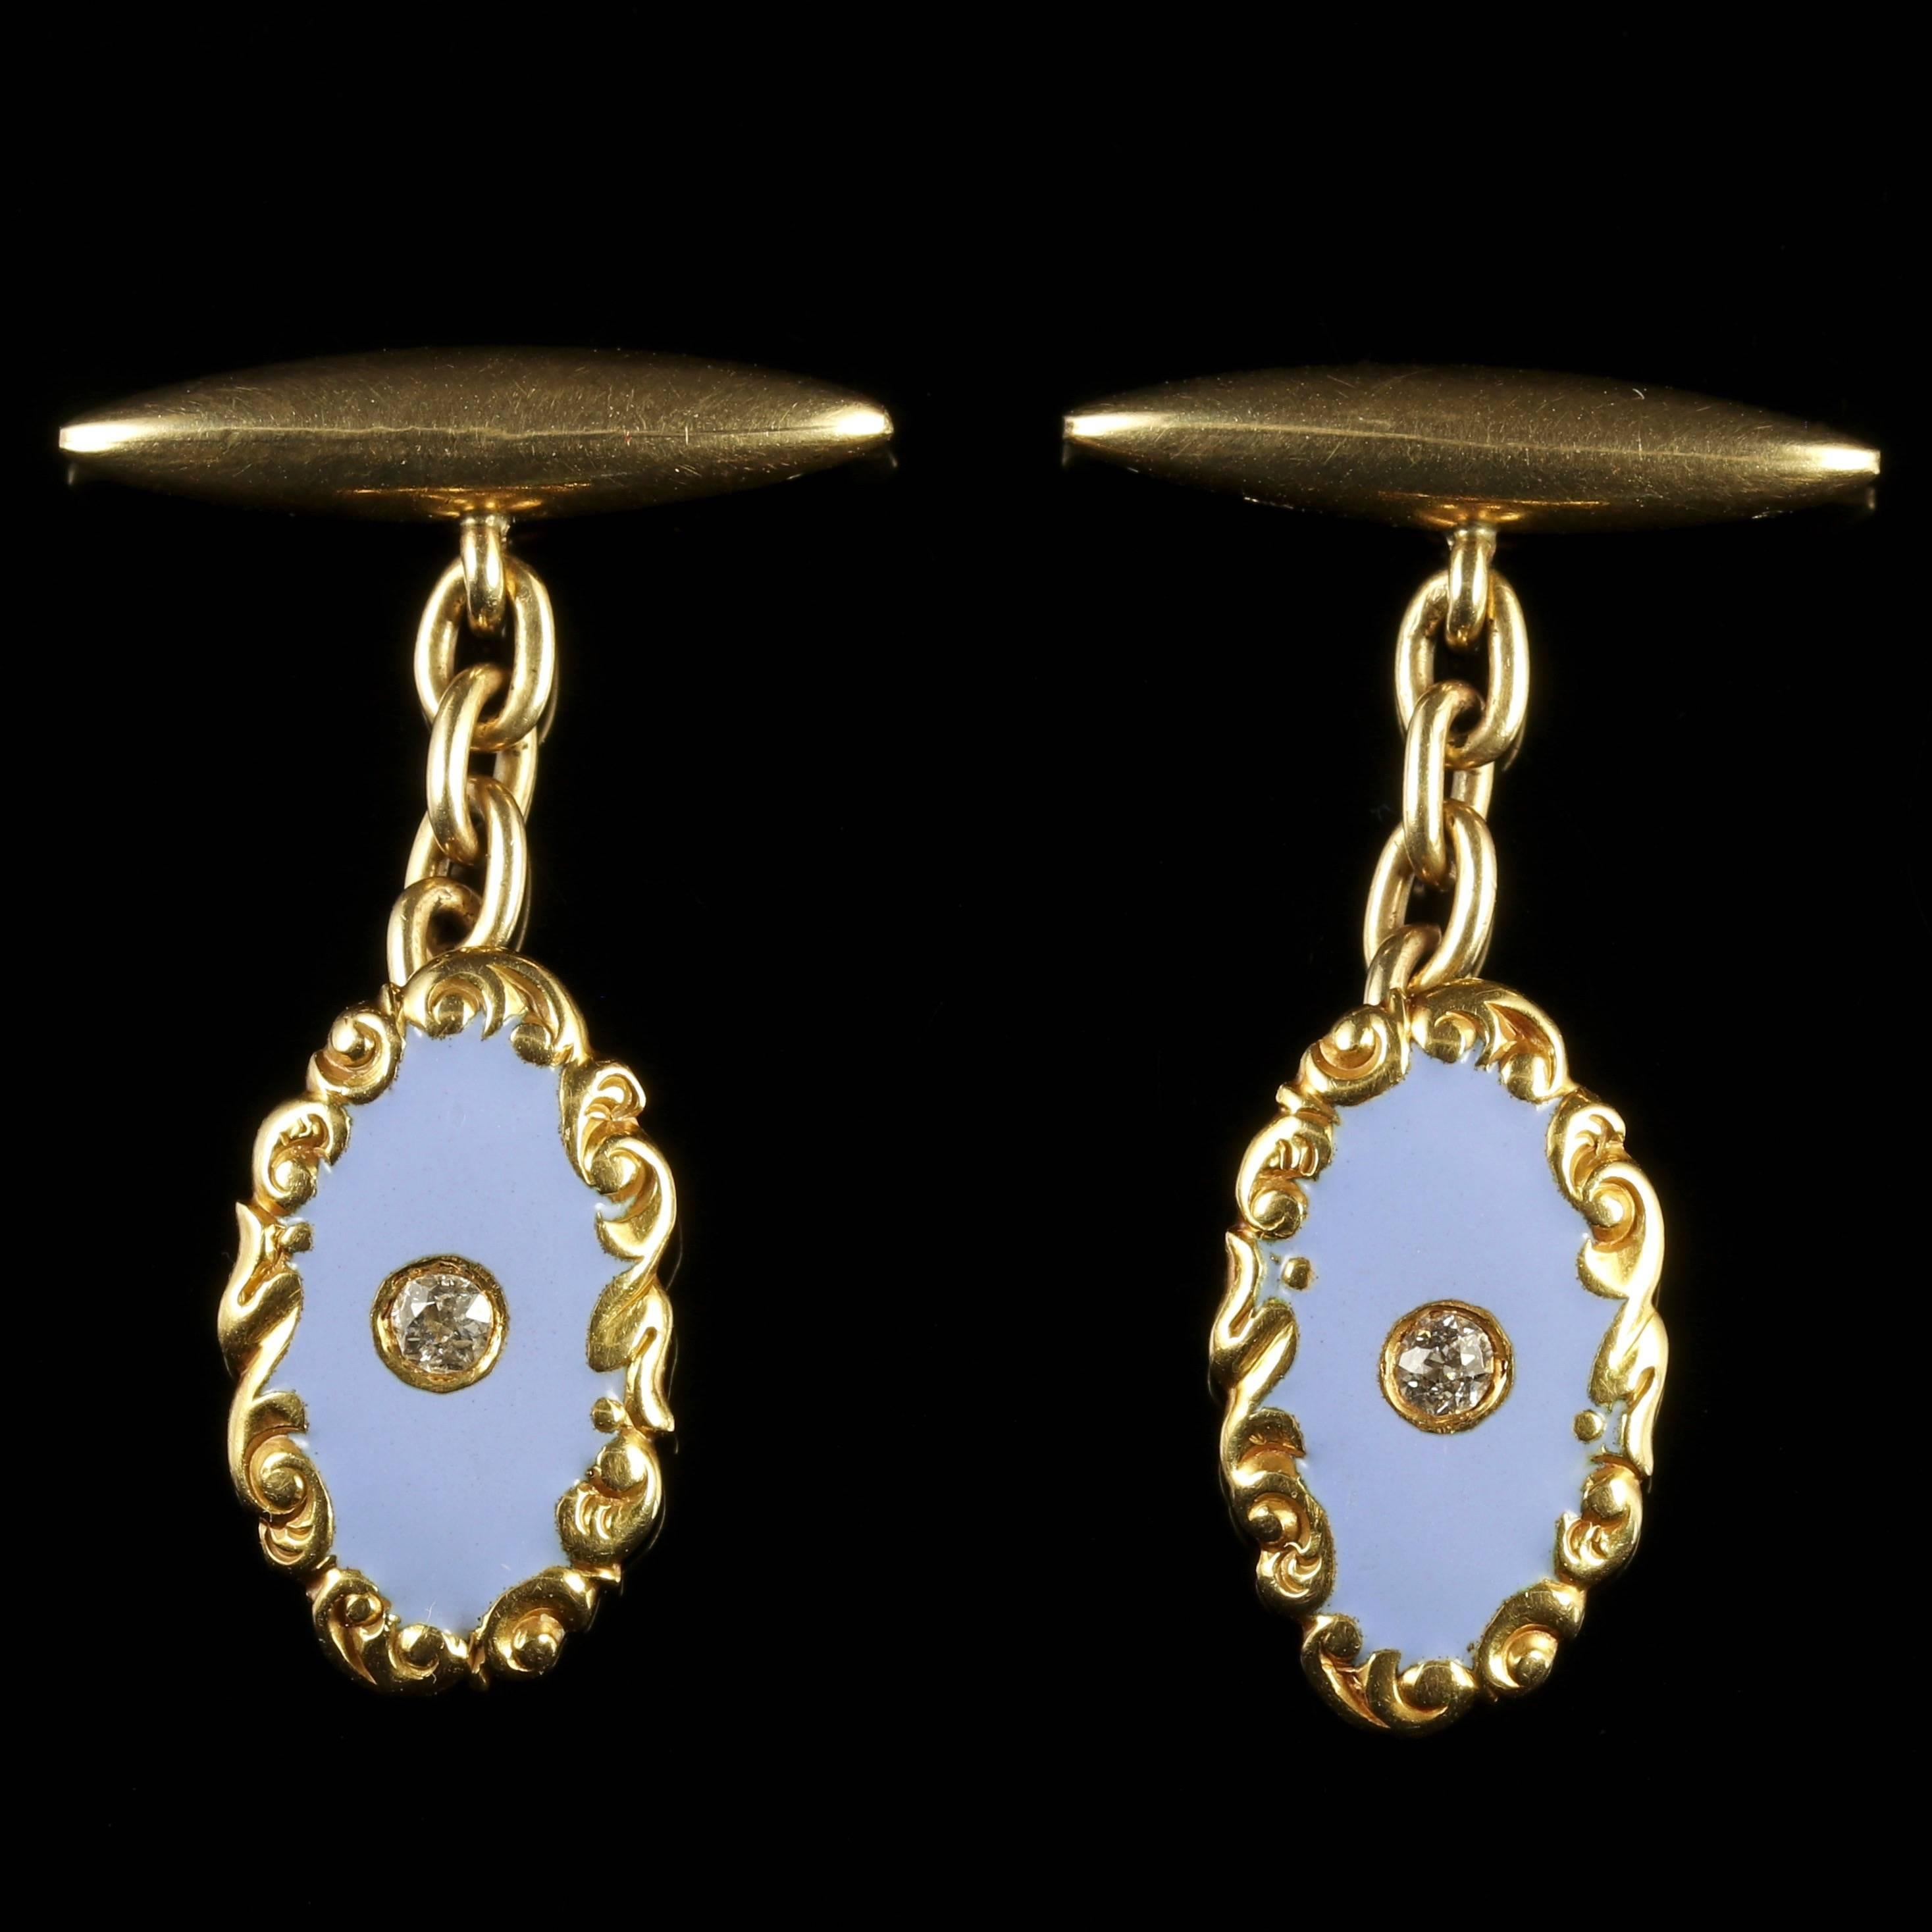 These spectacular 9ct Yellow Gold cufflinks are set with fabulous victorian detail.

The cufflinks have a lovely duck egg blue Enamel front adorned with a Diamond on the face of each. 

The Diamonds are a beautiful cushion cut set in 9ct